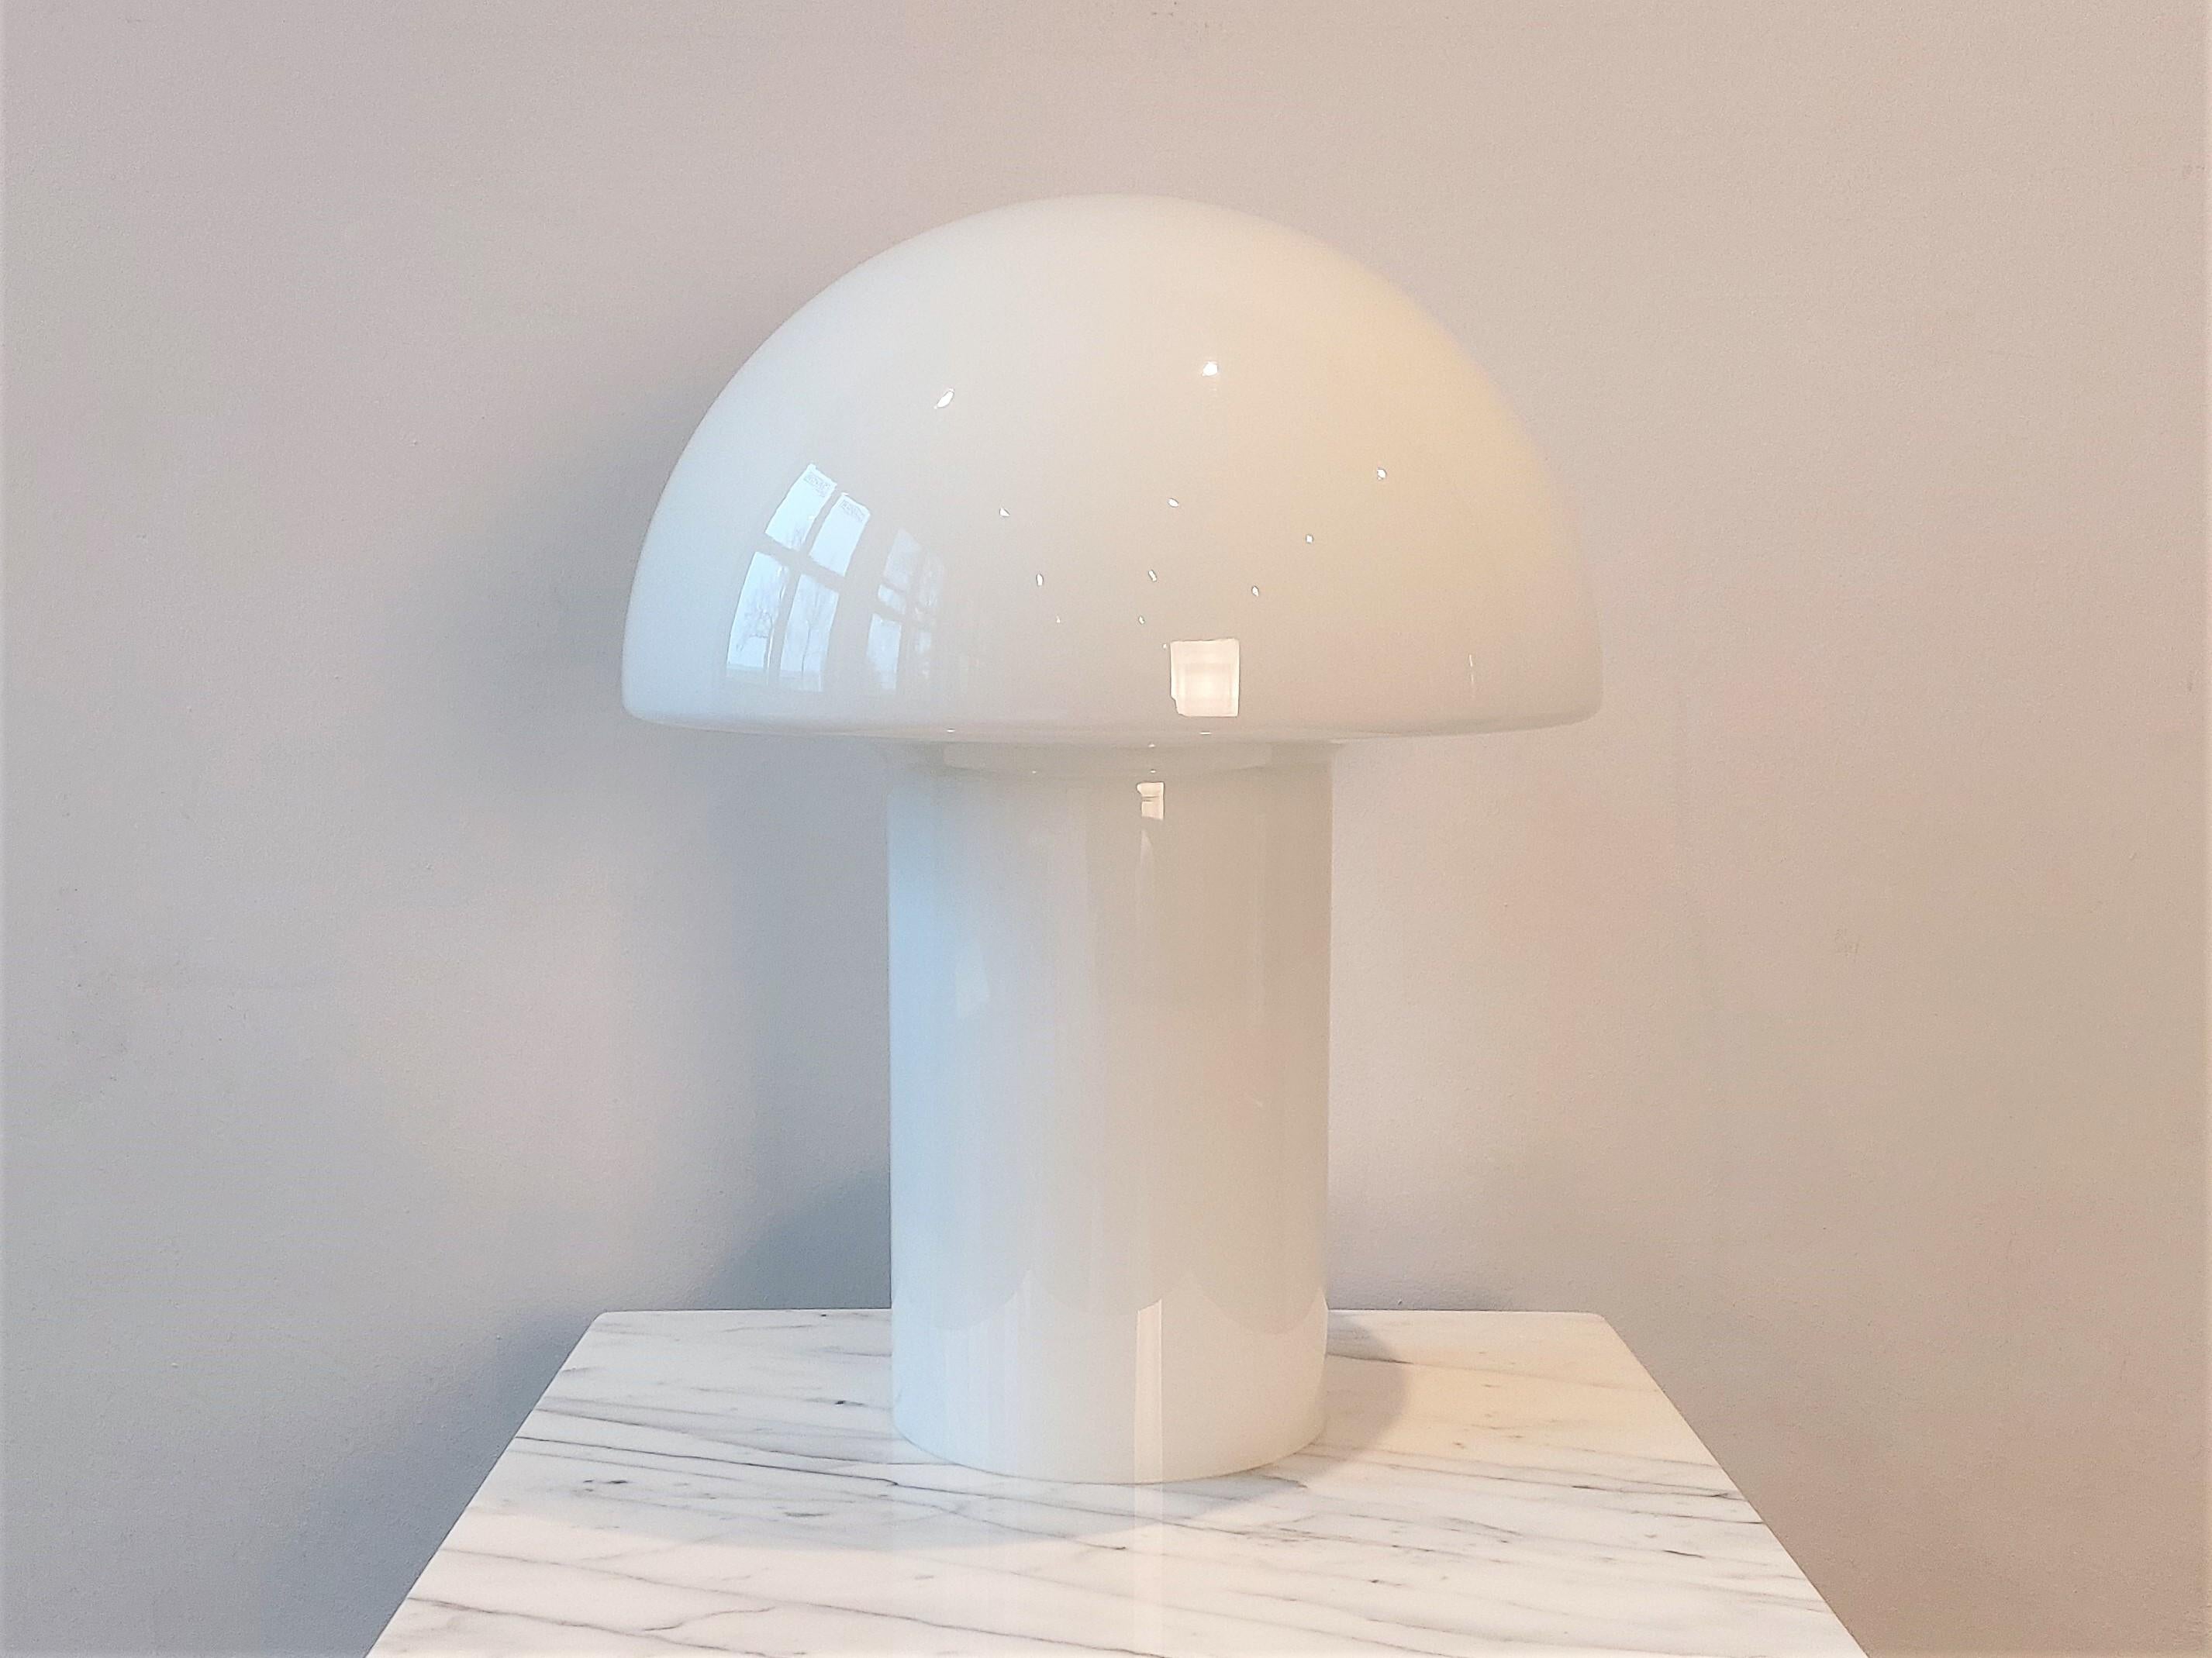 This mushroom shaped table lamp, model 'Lido' was designed in the 1970's and made by Peill & Putlzer. An impressive light the could be used as a floor lamp as well. The top and bottom can be lit separately and together. In this wihte color this is a